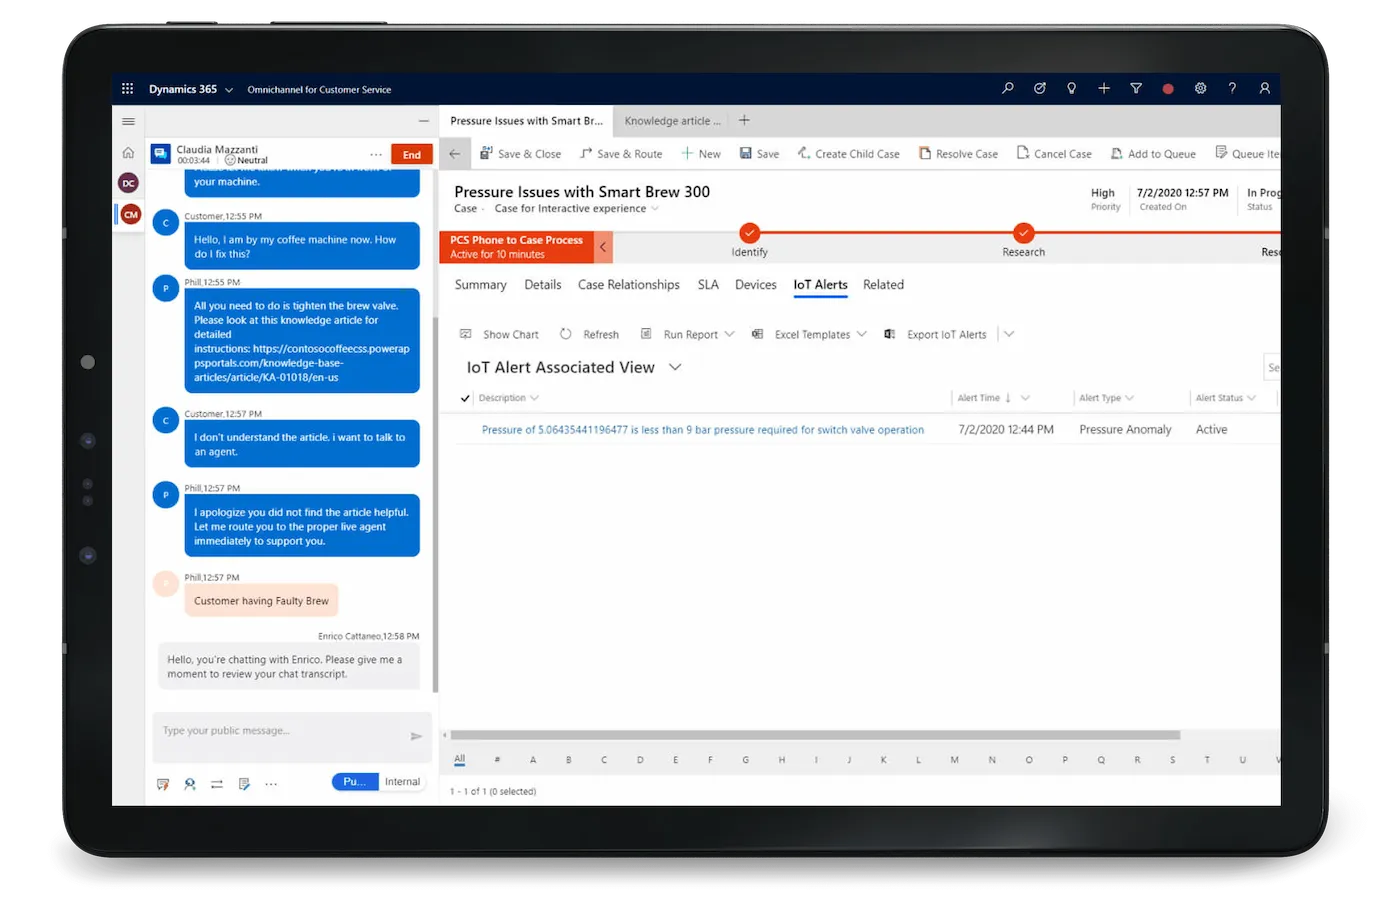 Dynamics 365 Customer Service help customer service managers solve problems